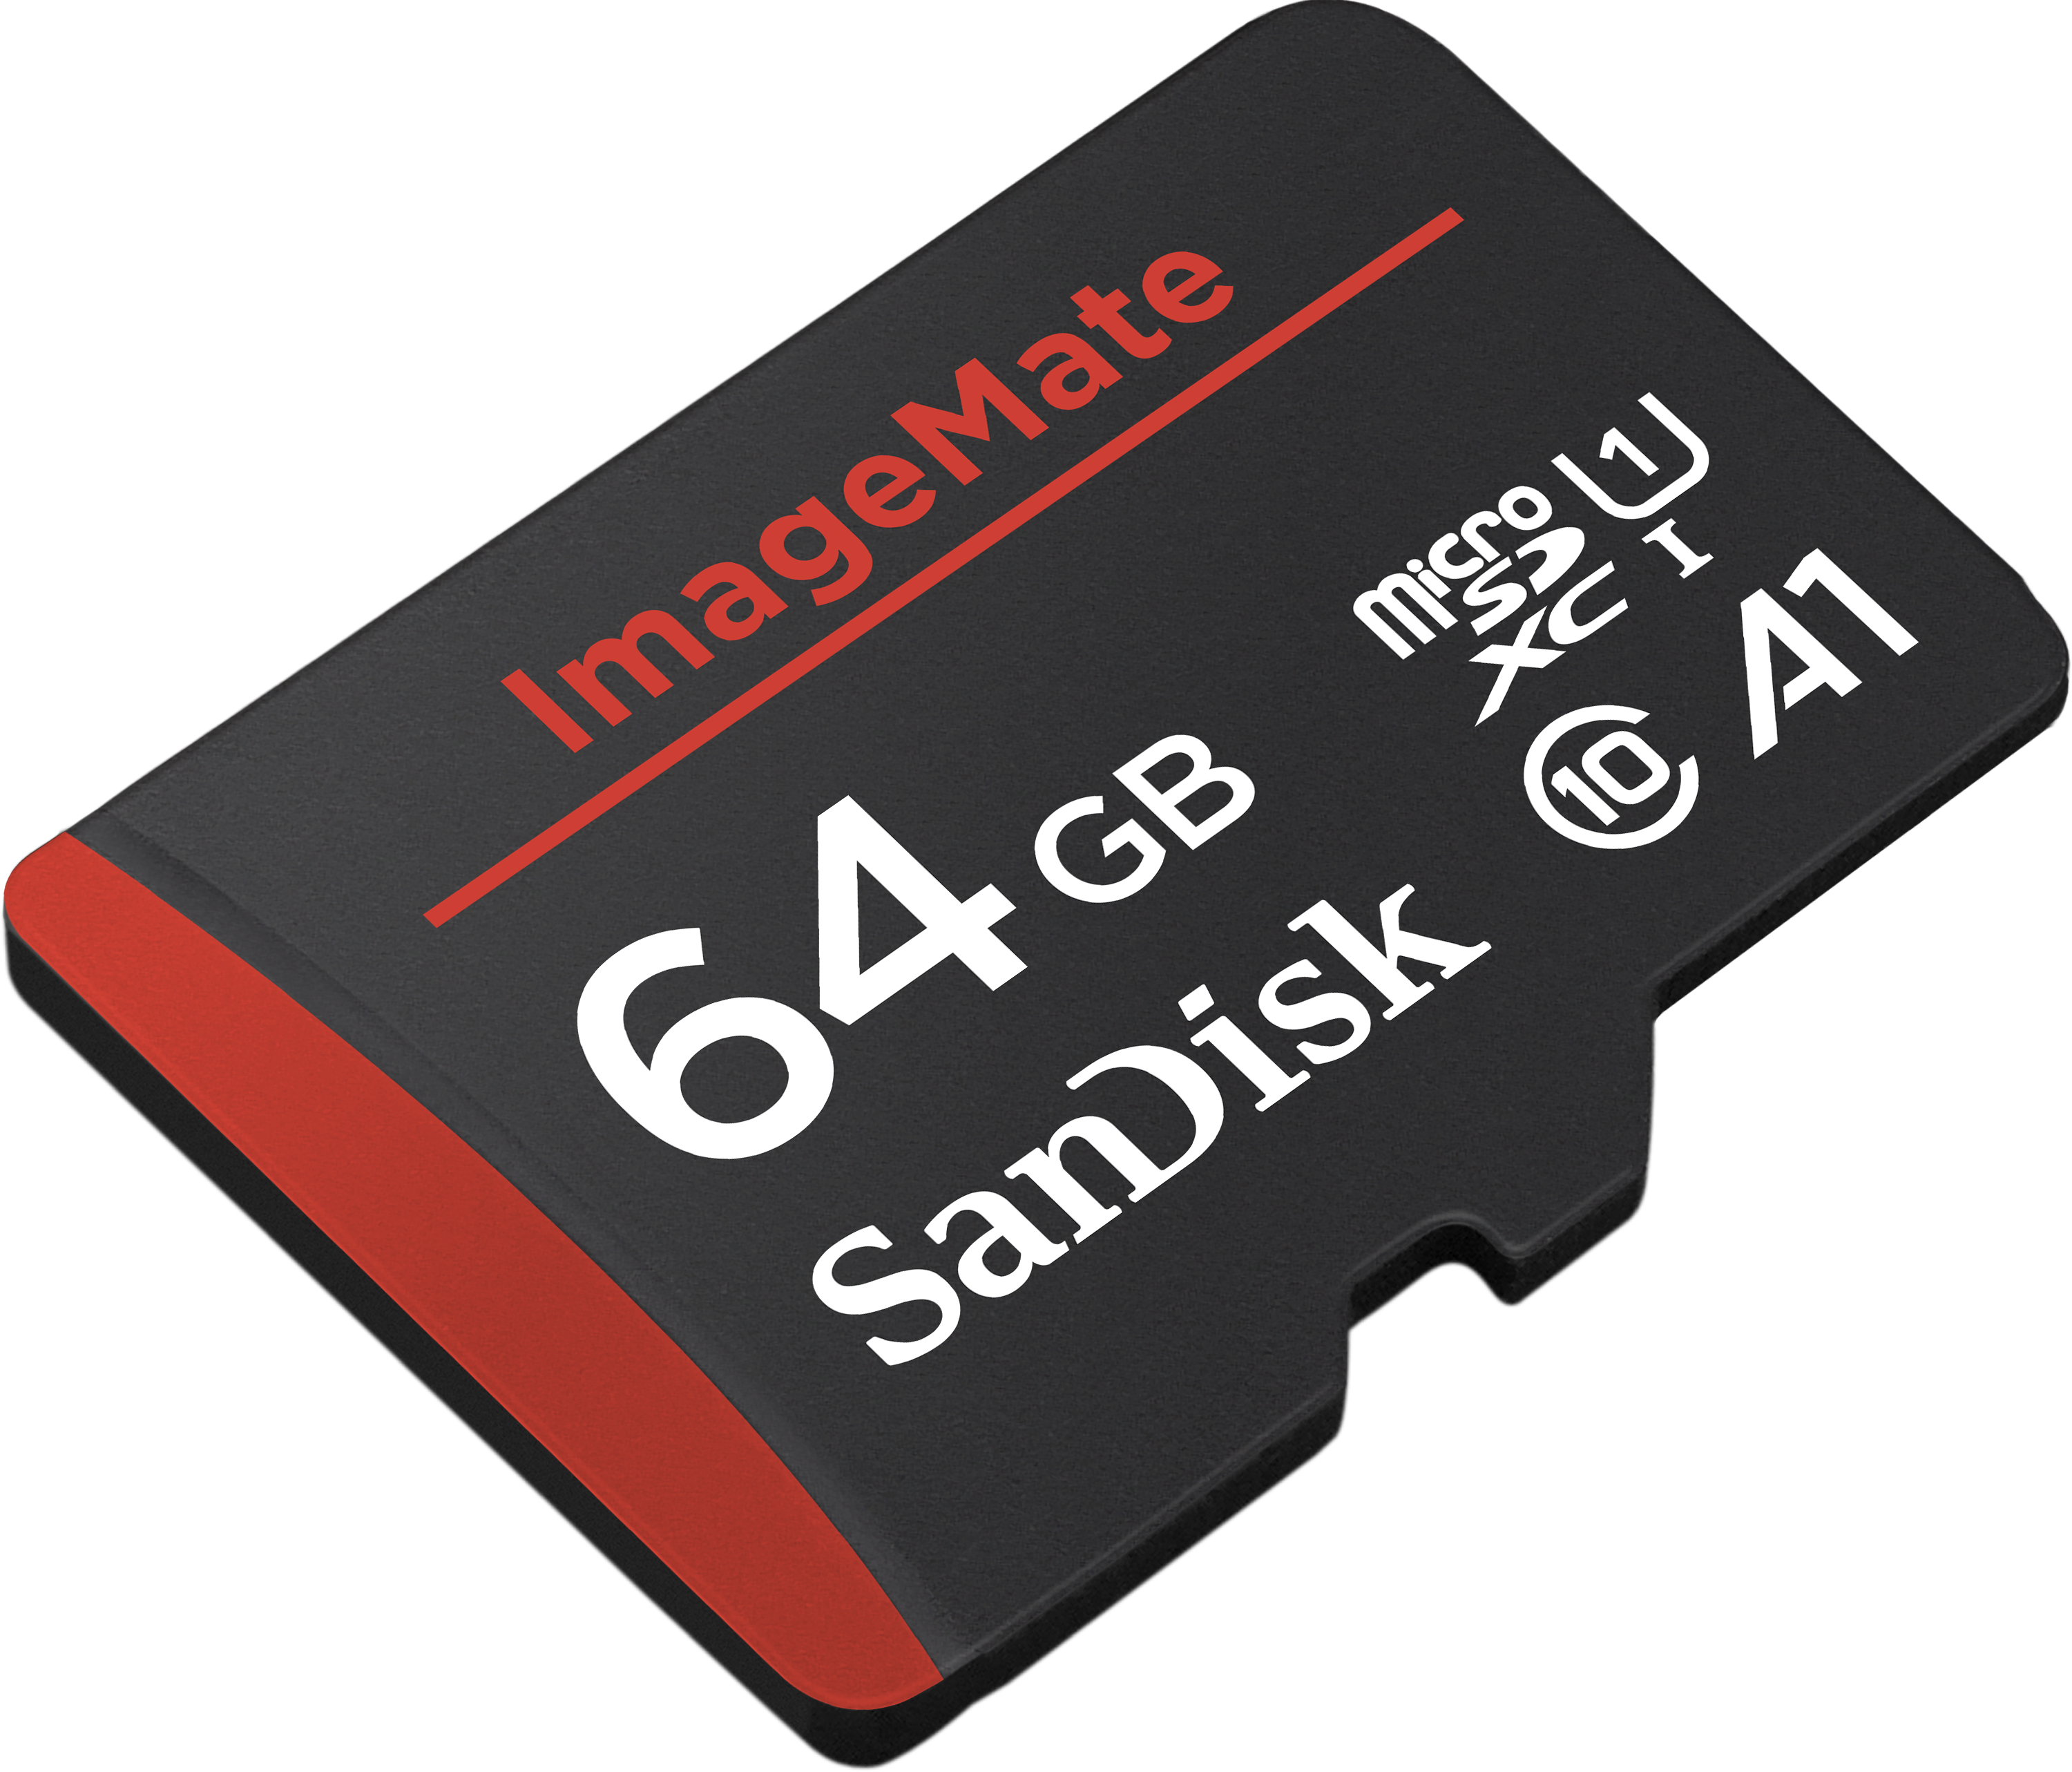 SanDisk 64GB Image Mate MicroSDXC UHS-1 Memory Card with Adapter - C10, U1, Full HD, A1 Micro SD Card - image 3 of 6